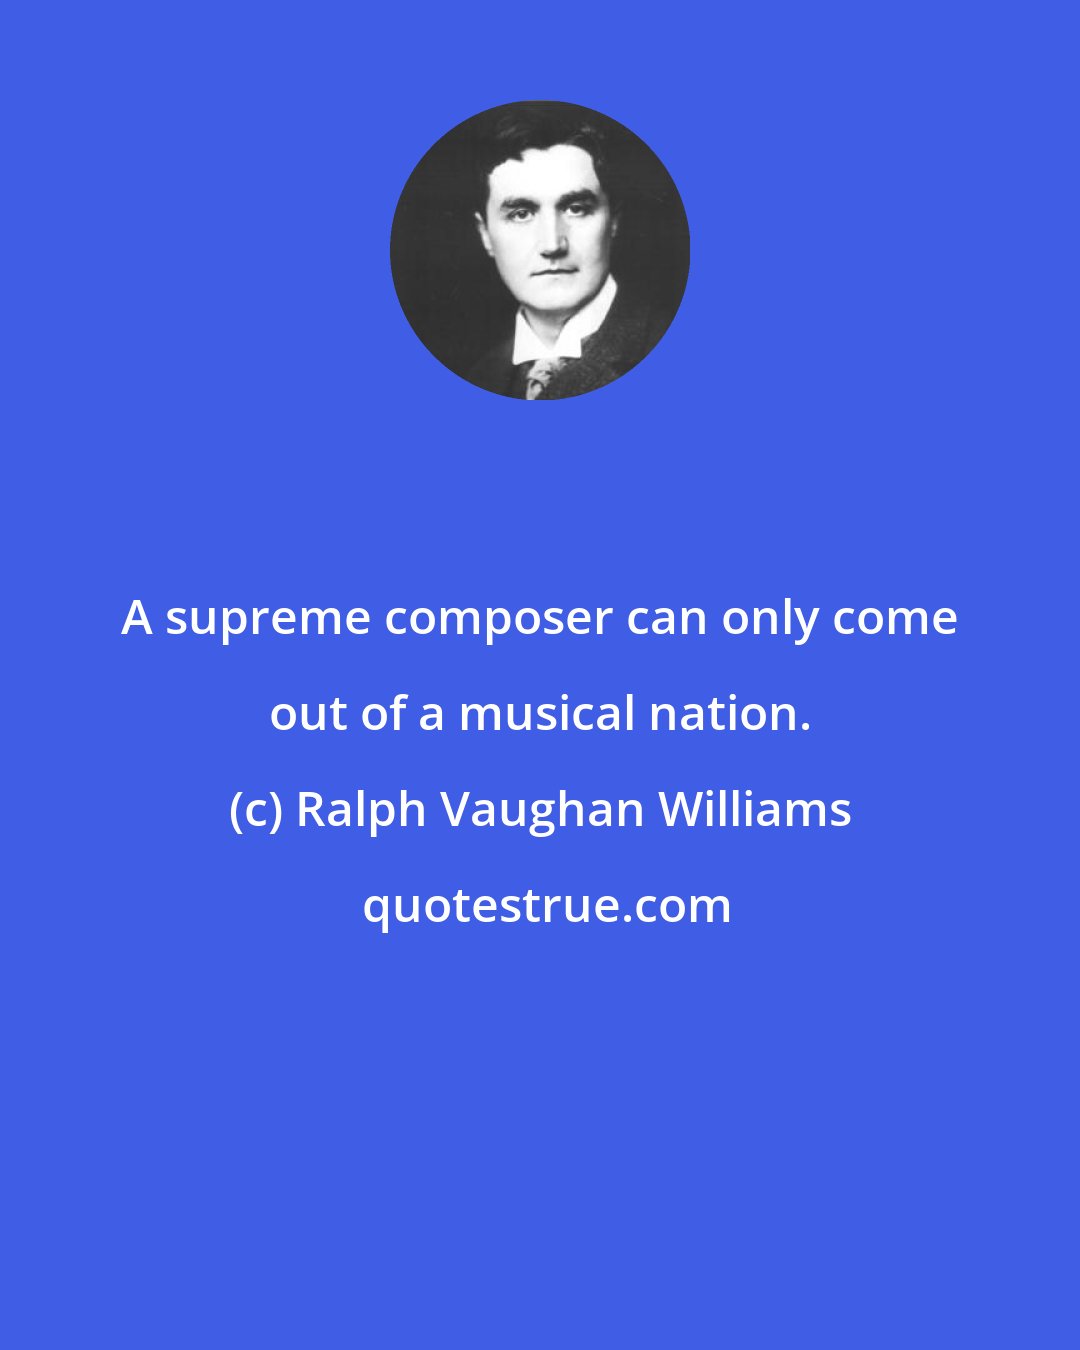 Ralph Vaughan Williams: A supreme composer can only come out of a musical nation.